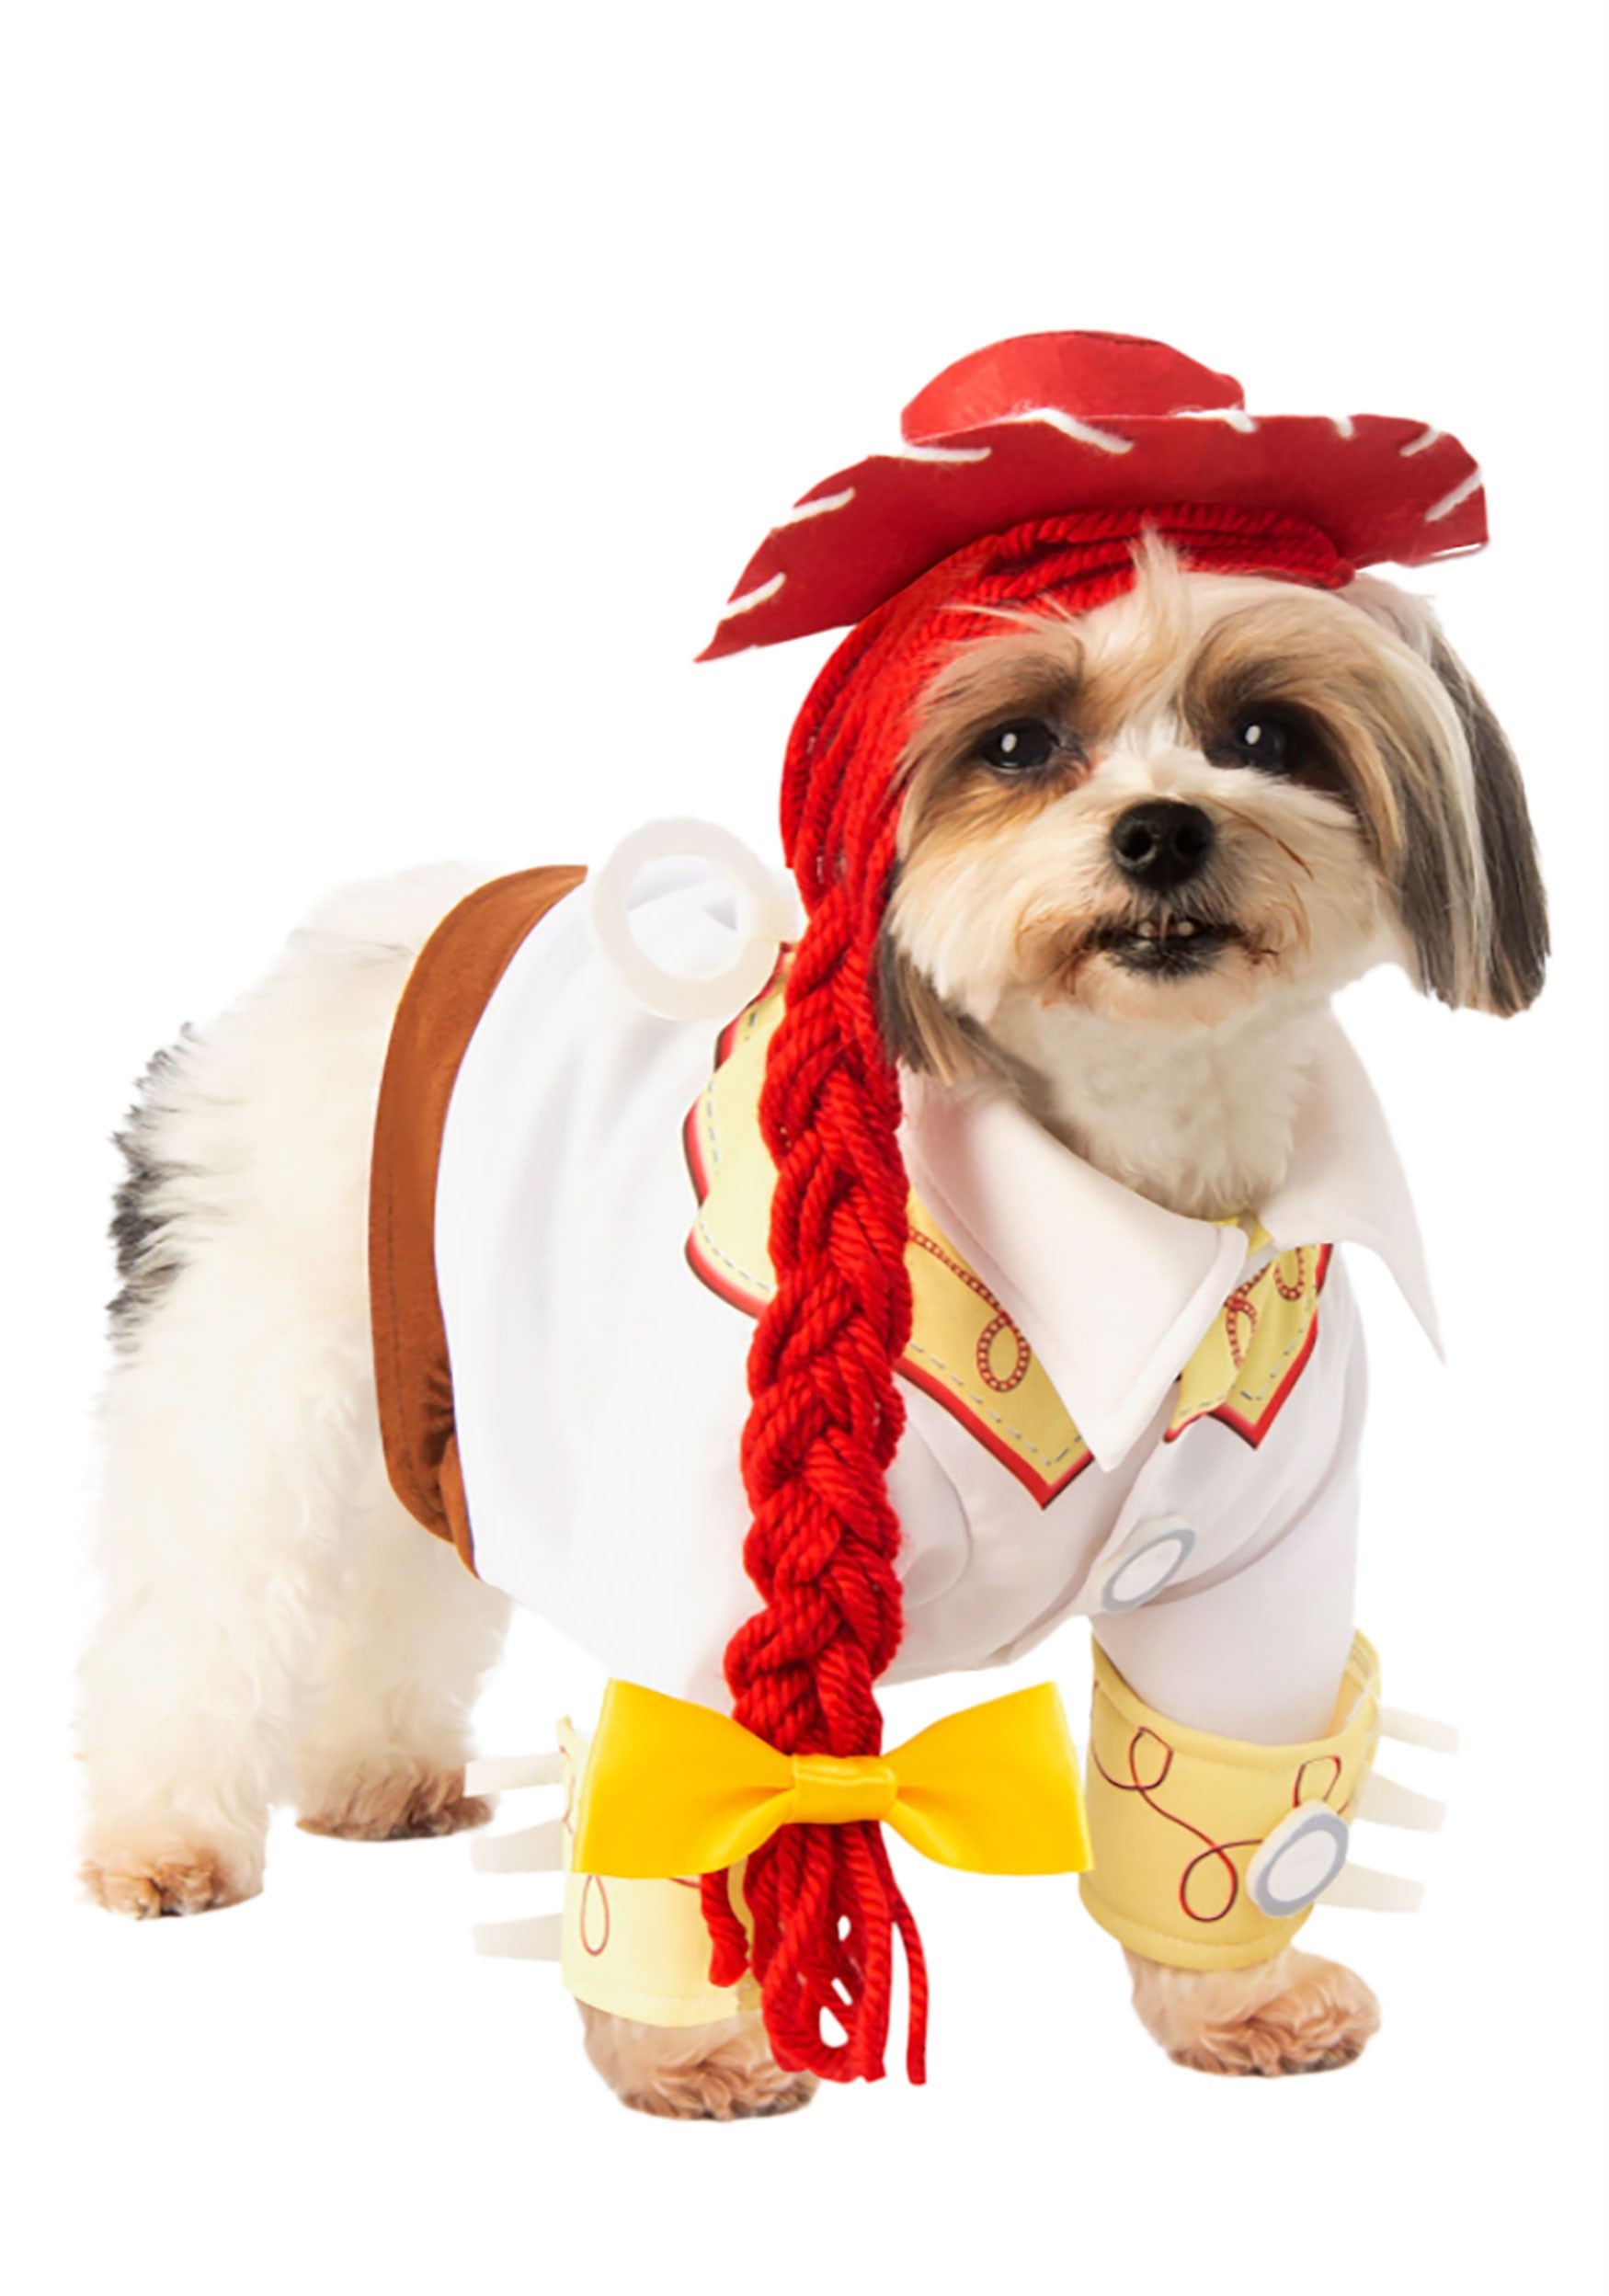 Toy Story Jessie Costume For Dogs